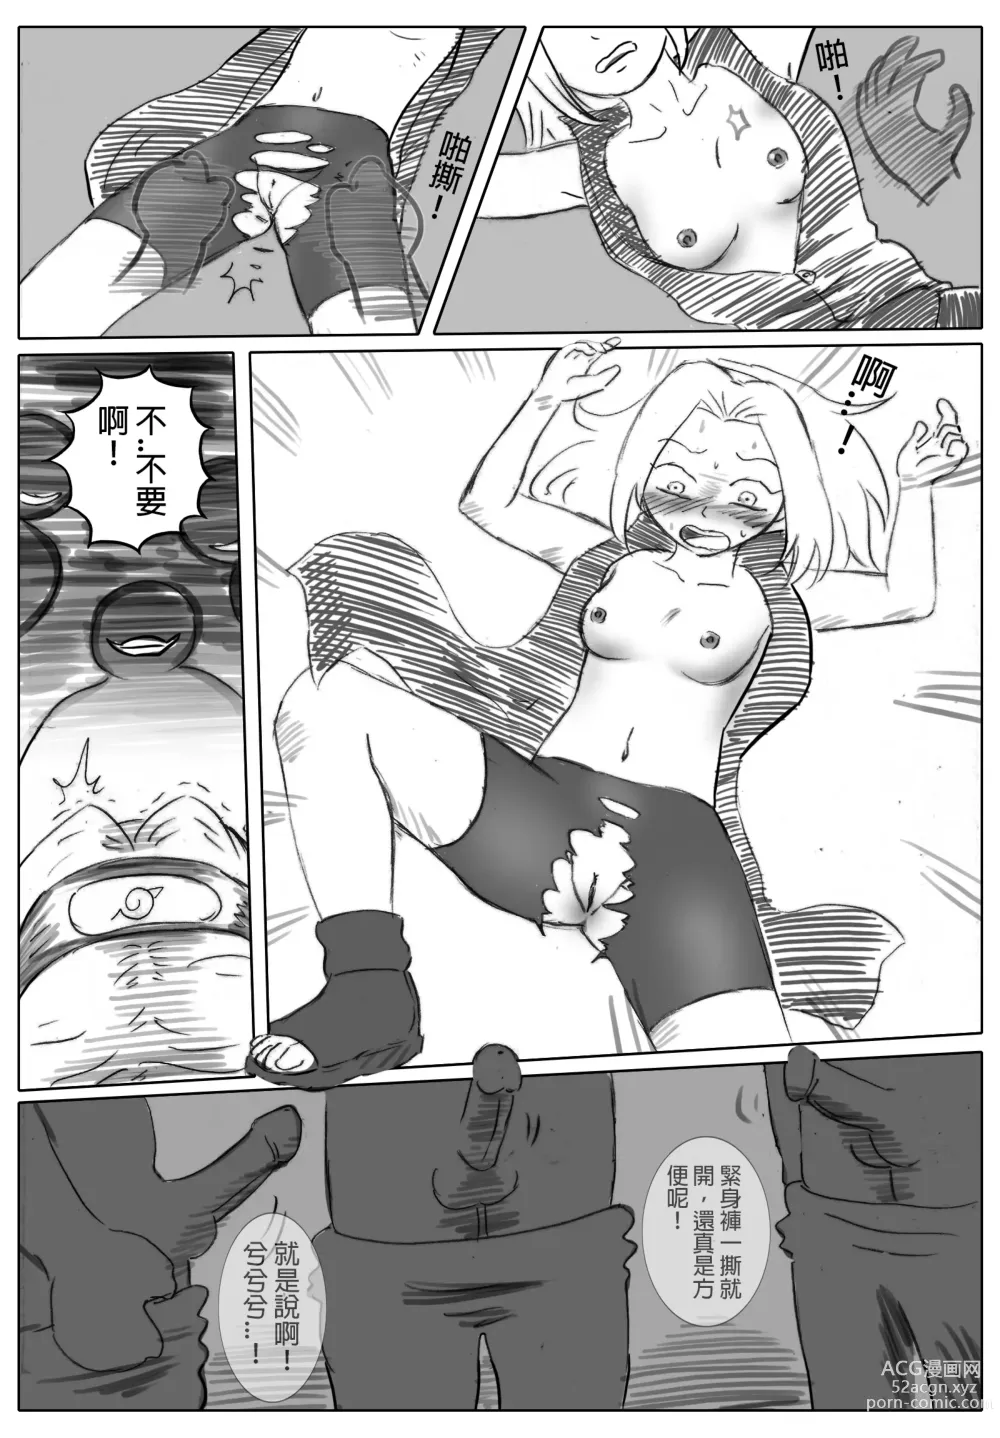 Page 3 of doujinshi 琄偿腻 い 刚诀